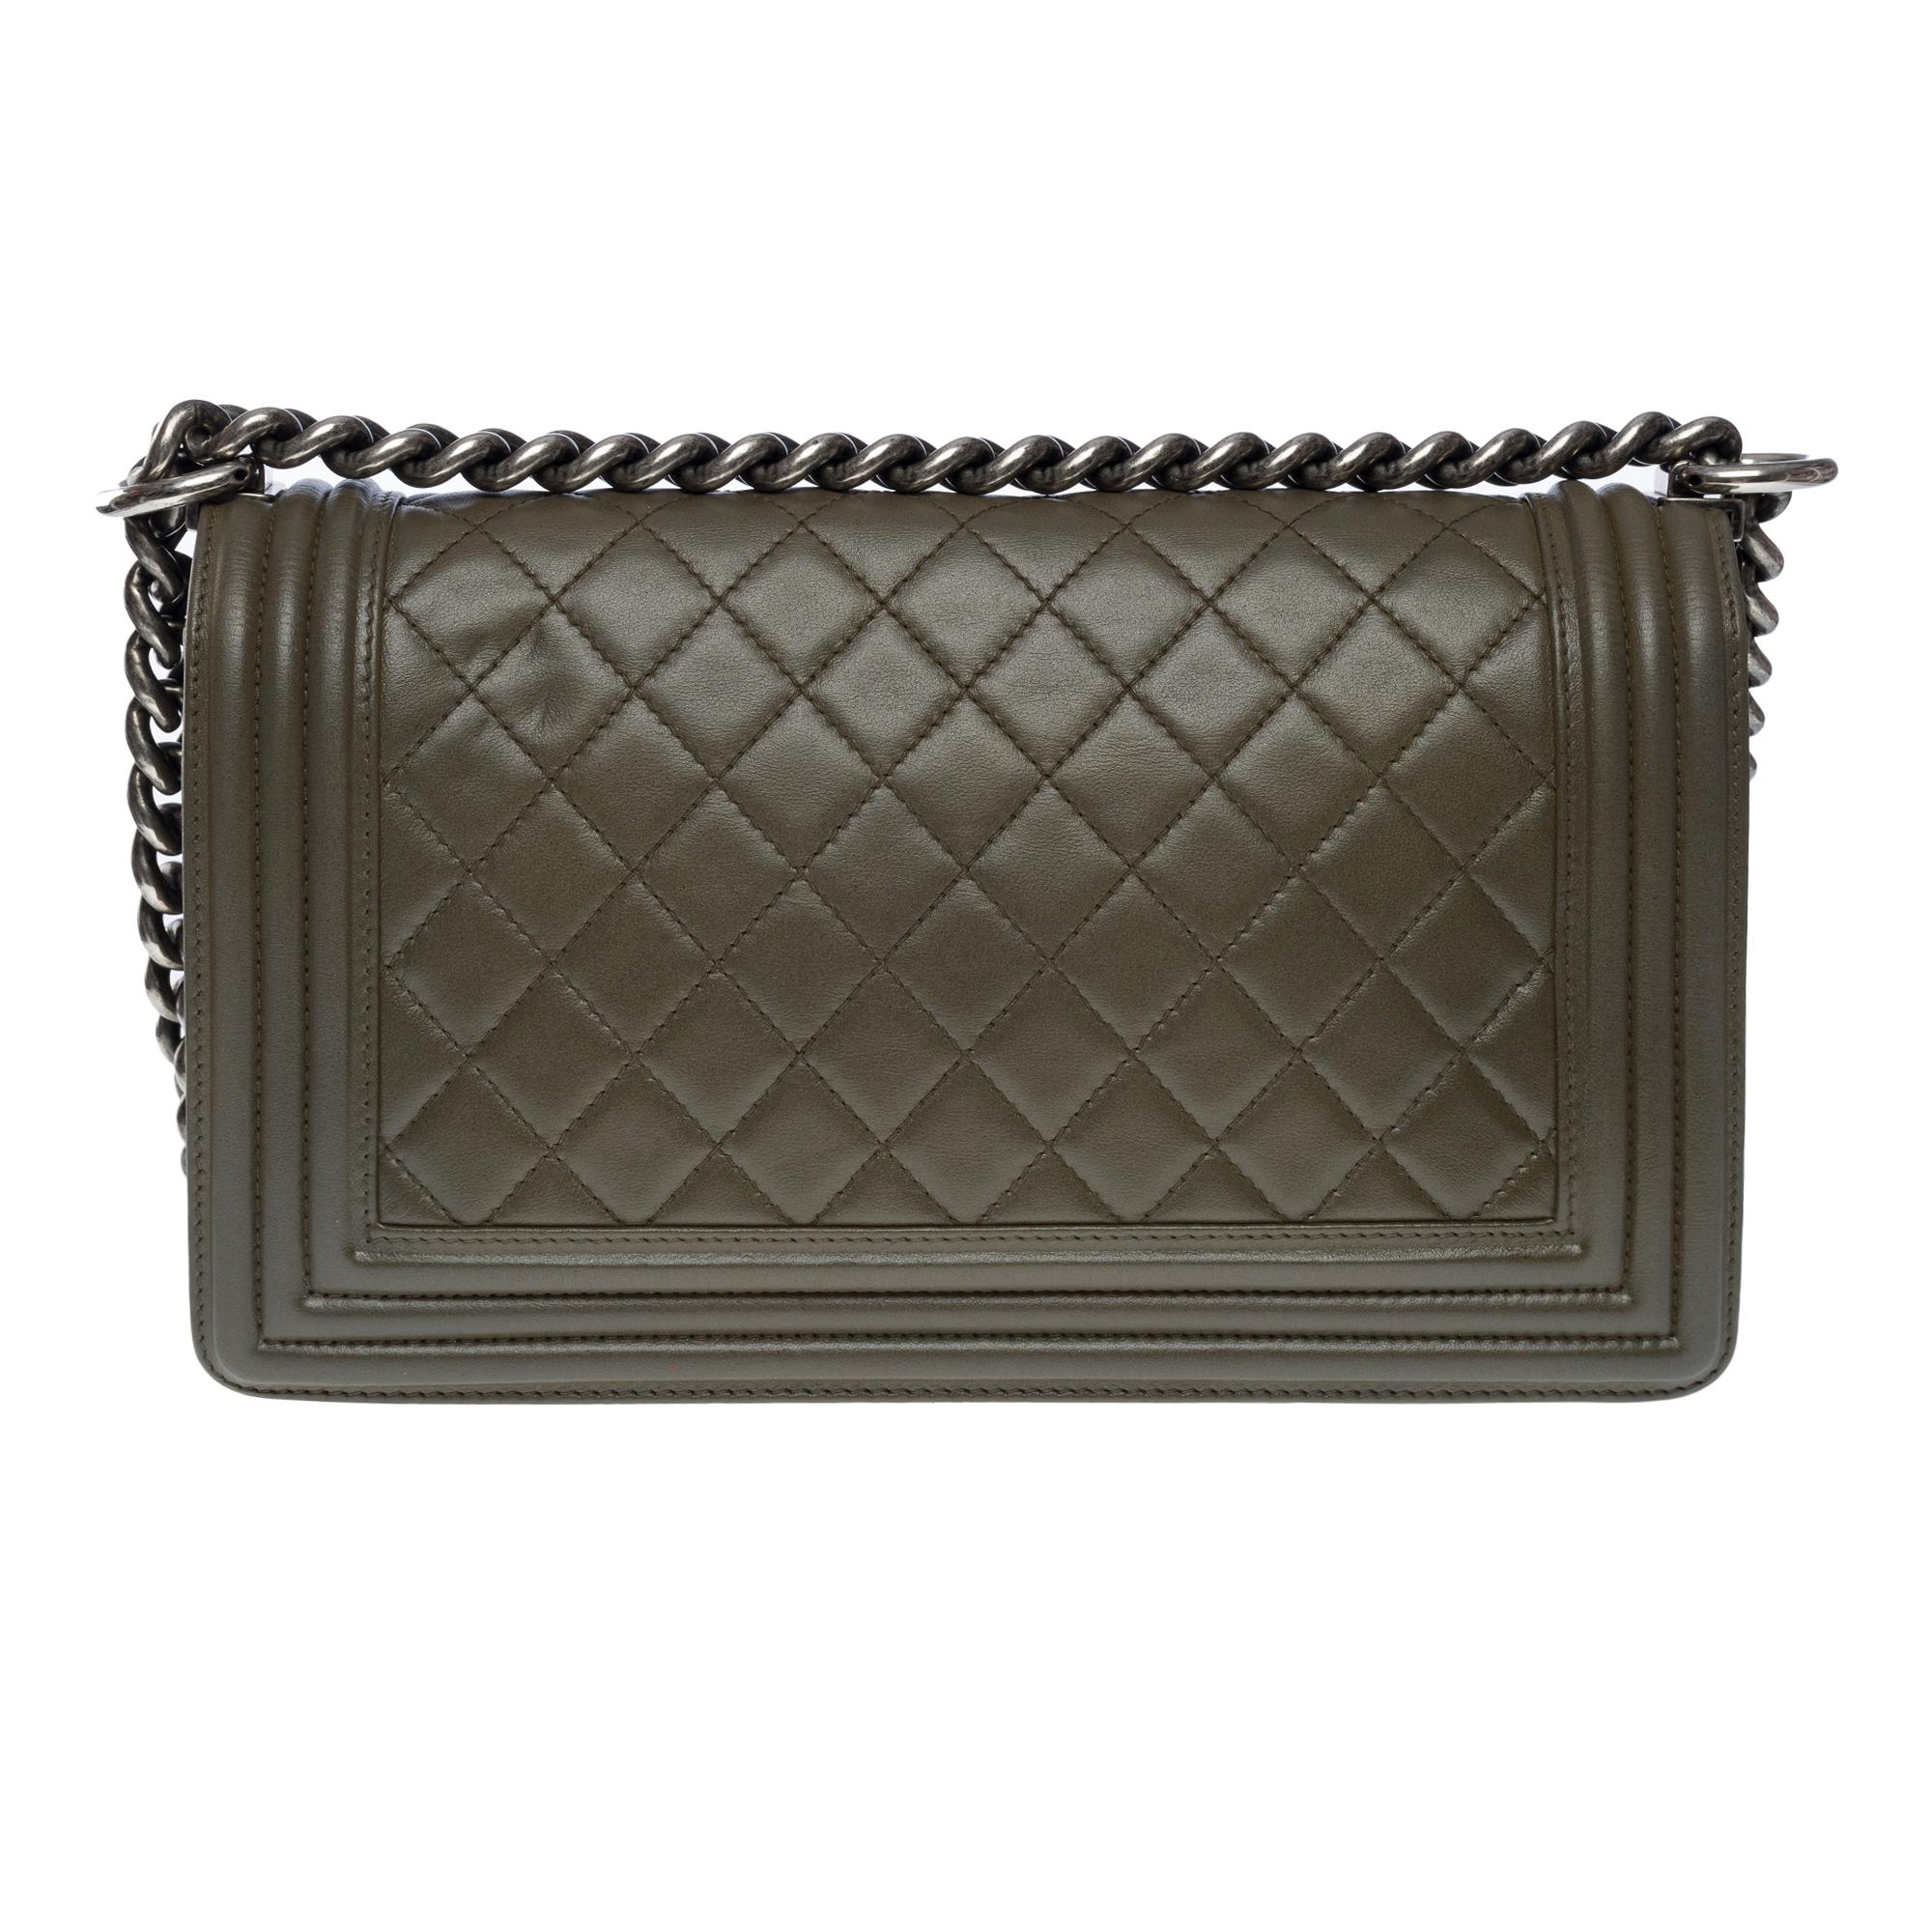 The iconic Chanel Boy Old Medium shoulder bag in khaki quilted leather, ruthenium metal hardware, an adjustable ruthenium metal chain handle for shoulder or shoulder support

A ruthenium metal closure on flap
Inner lining in grey canvas, one patch